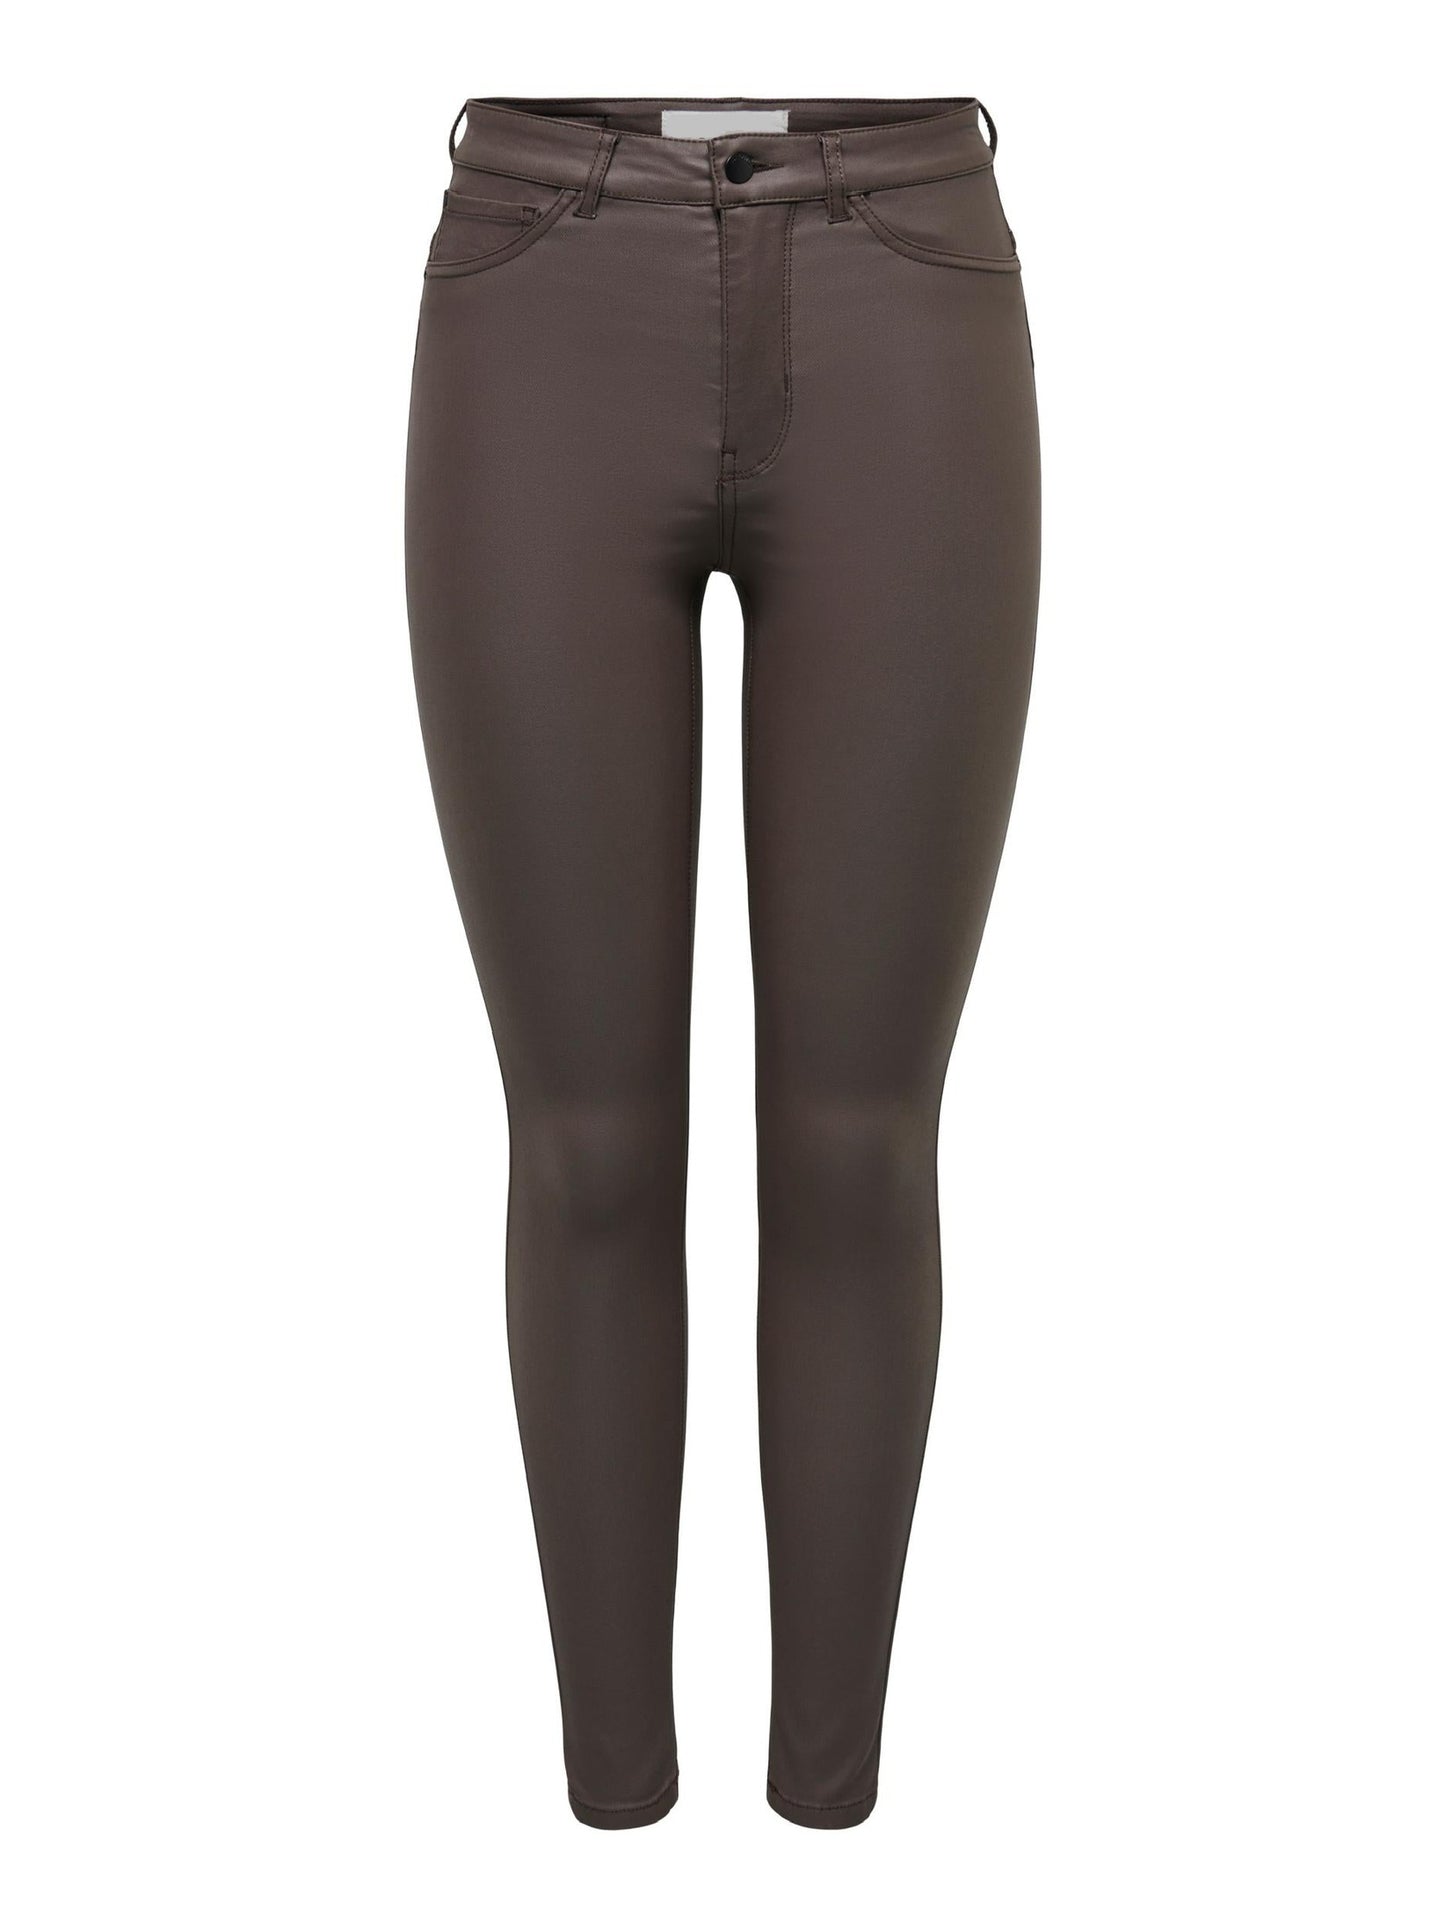 Chocolate brown faux leather trousers